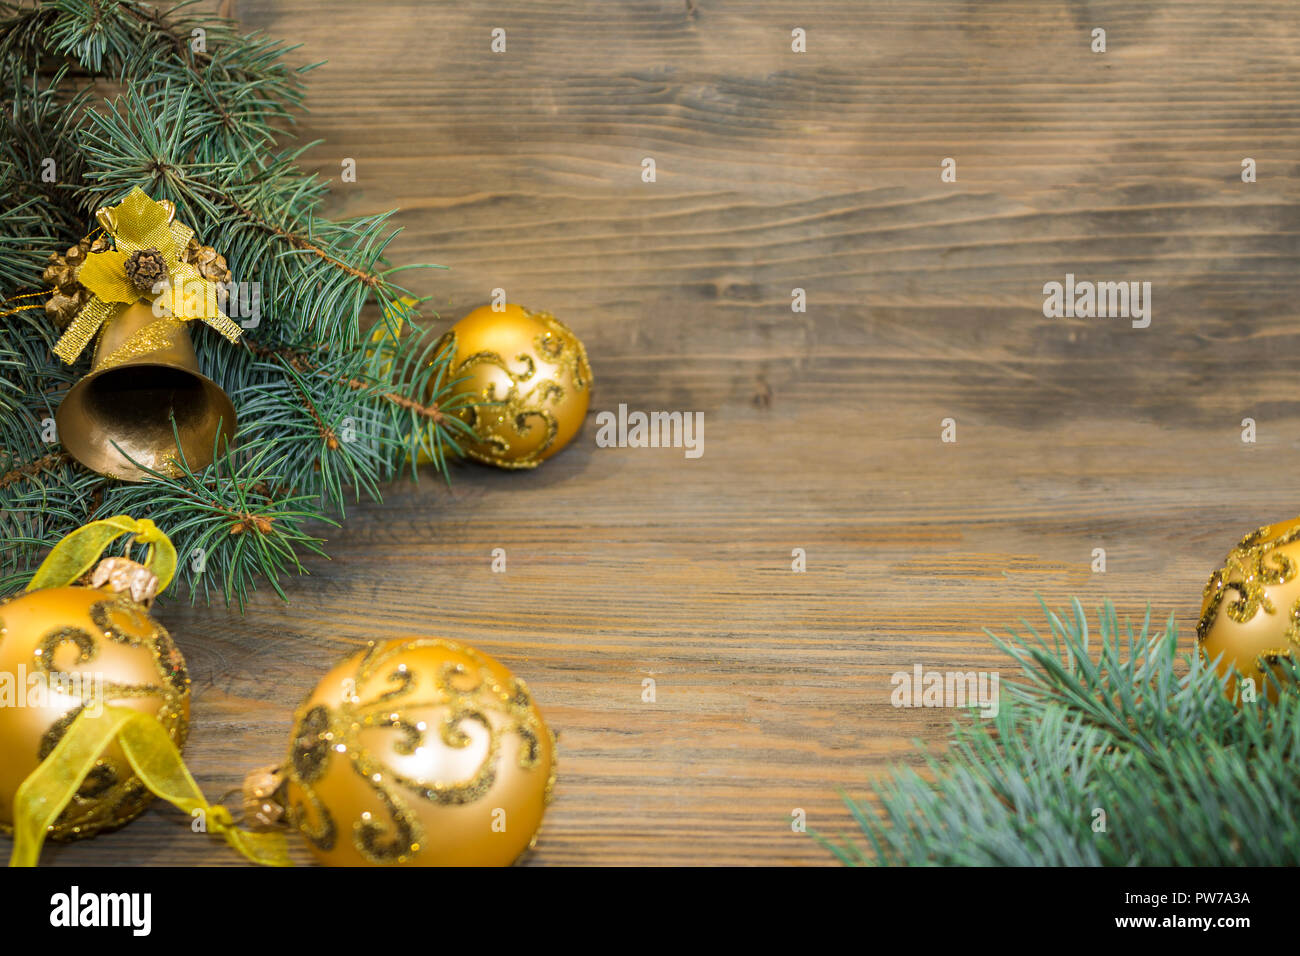 New year or christmas background with blank space fro text Stock Photo